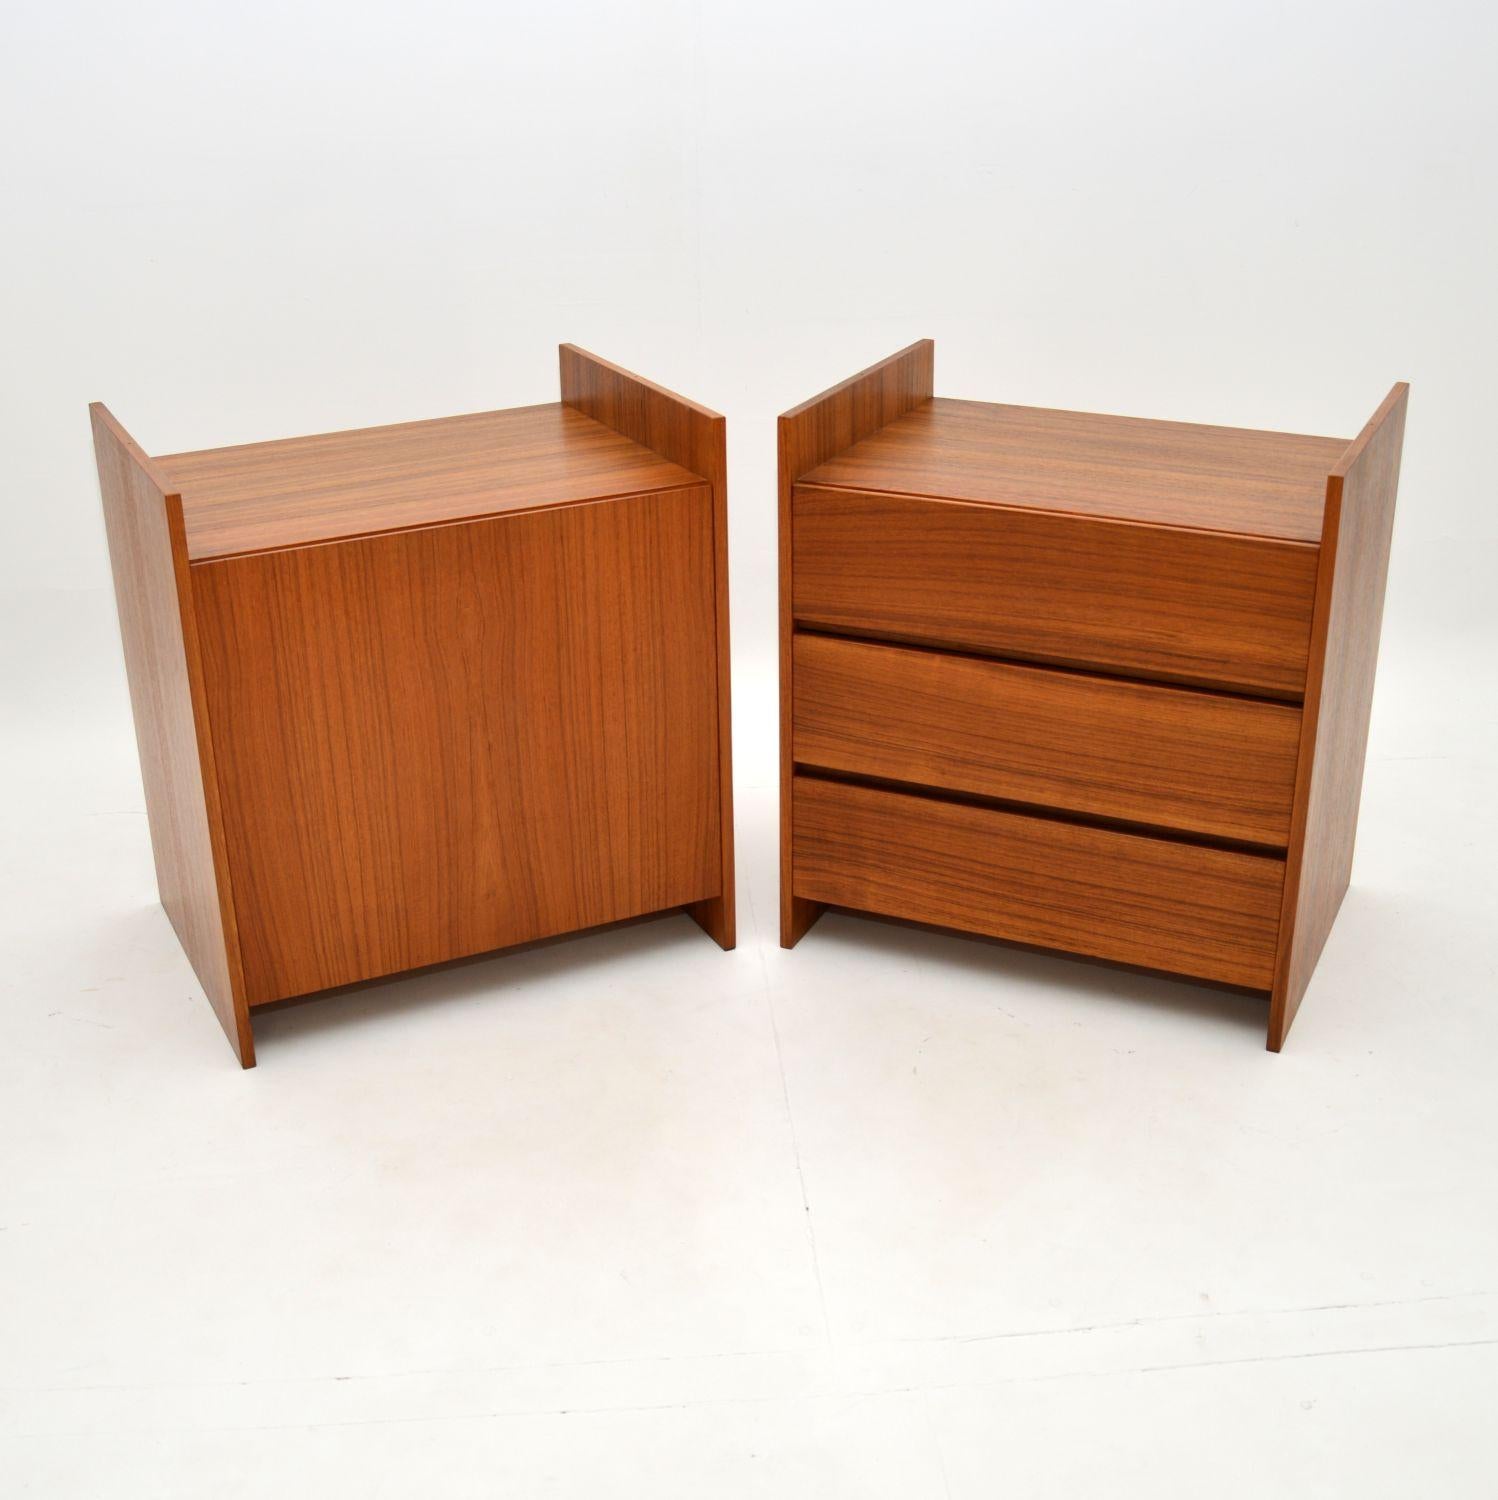 A wonderful and extremely rare Danish teak modular cabinet. We believe this was designed by Poul Cadovius, it was made in Denmark and dates from the 1960’s.

We obtained this from the original owner who bought it from Heal’s in the 1960’s, the